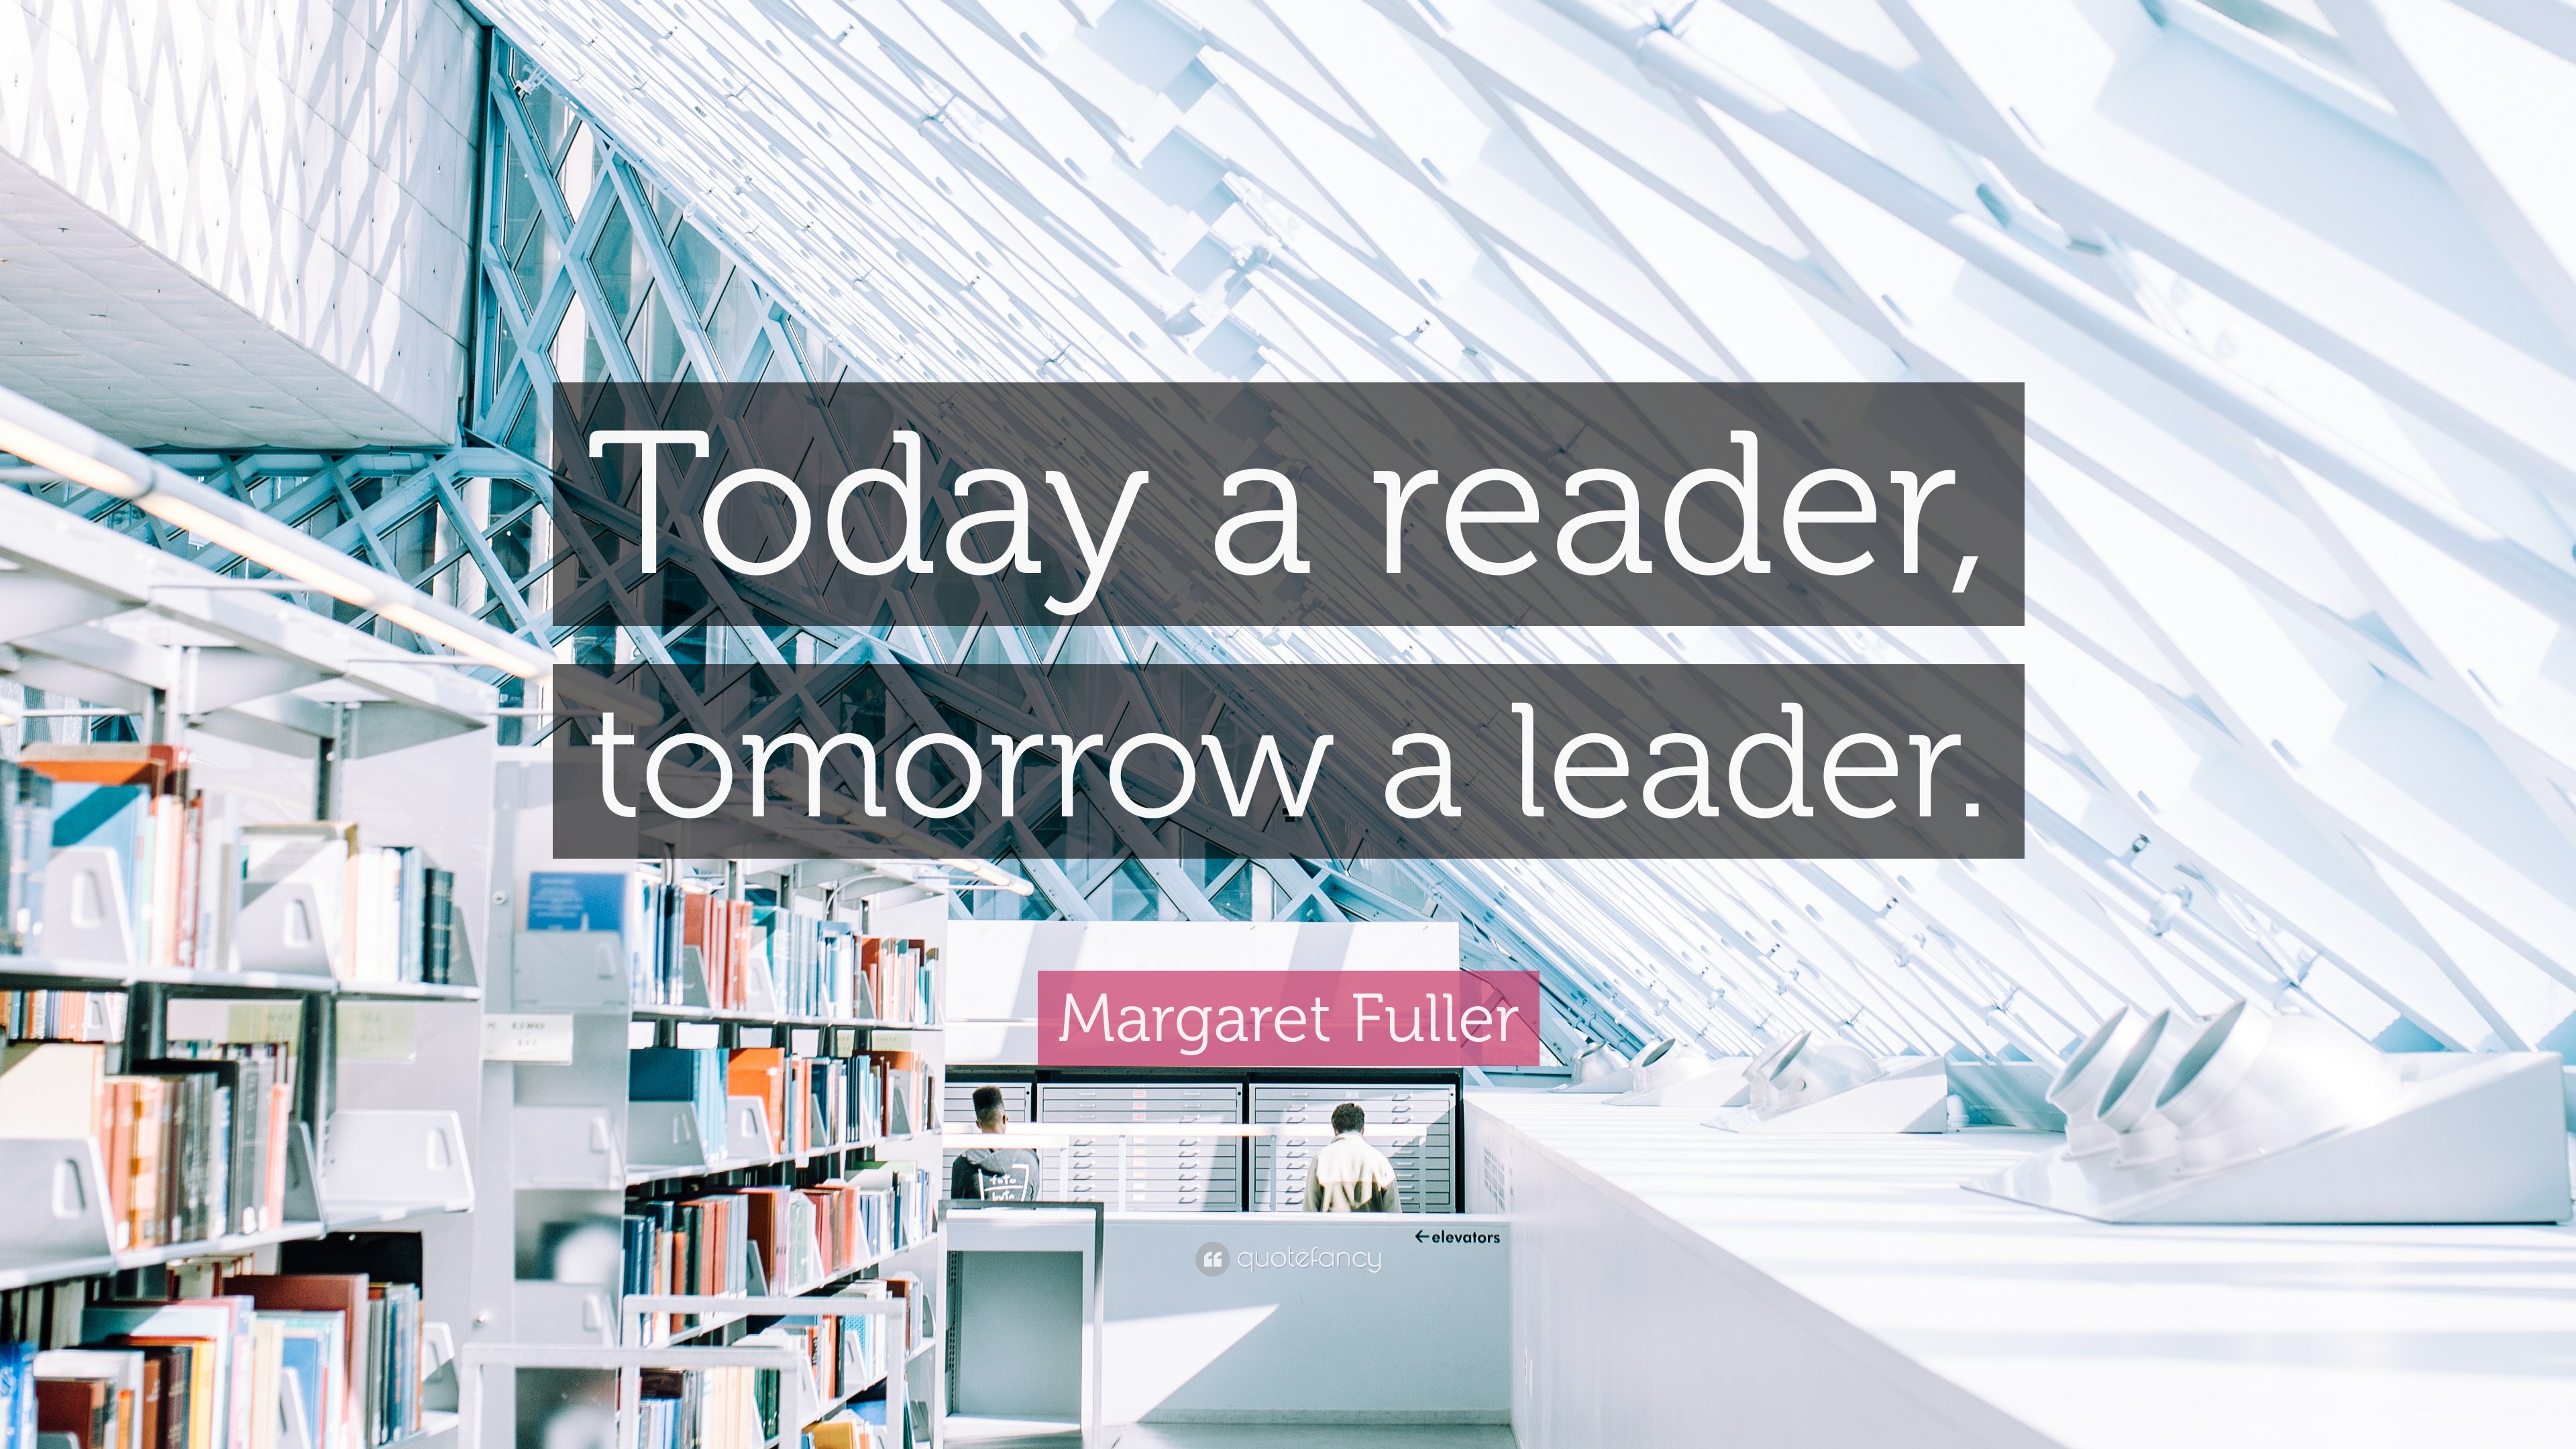 Margaret Fuller Quote: “Today a reader, tomorrow a leader.”